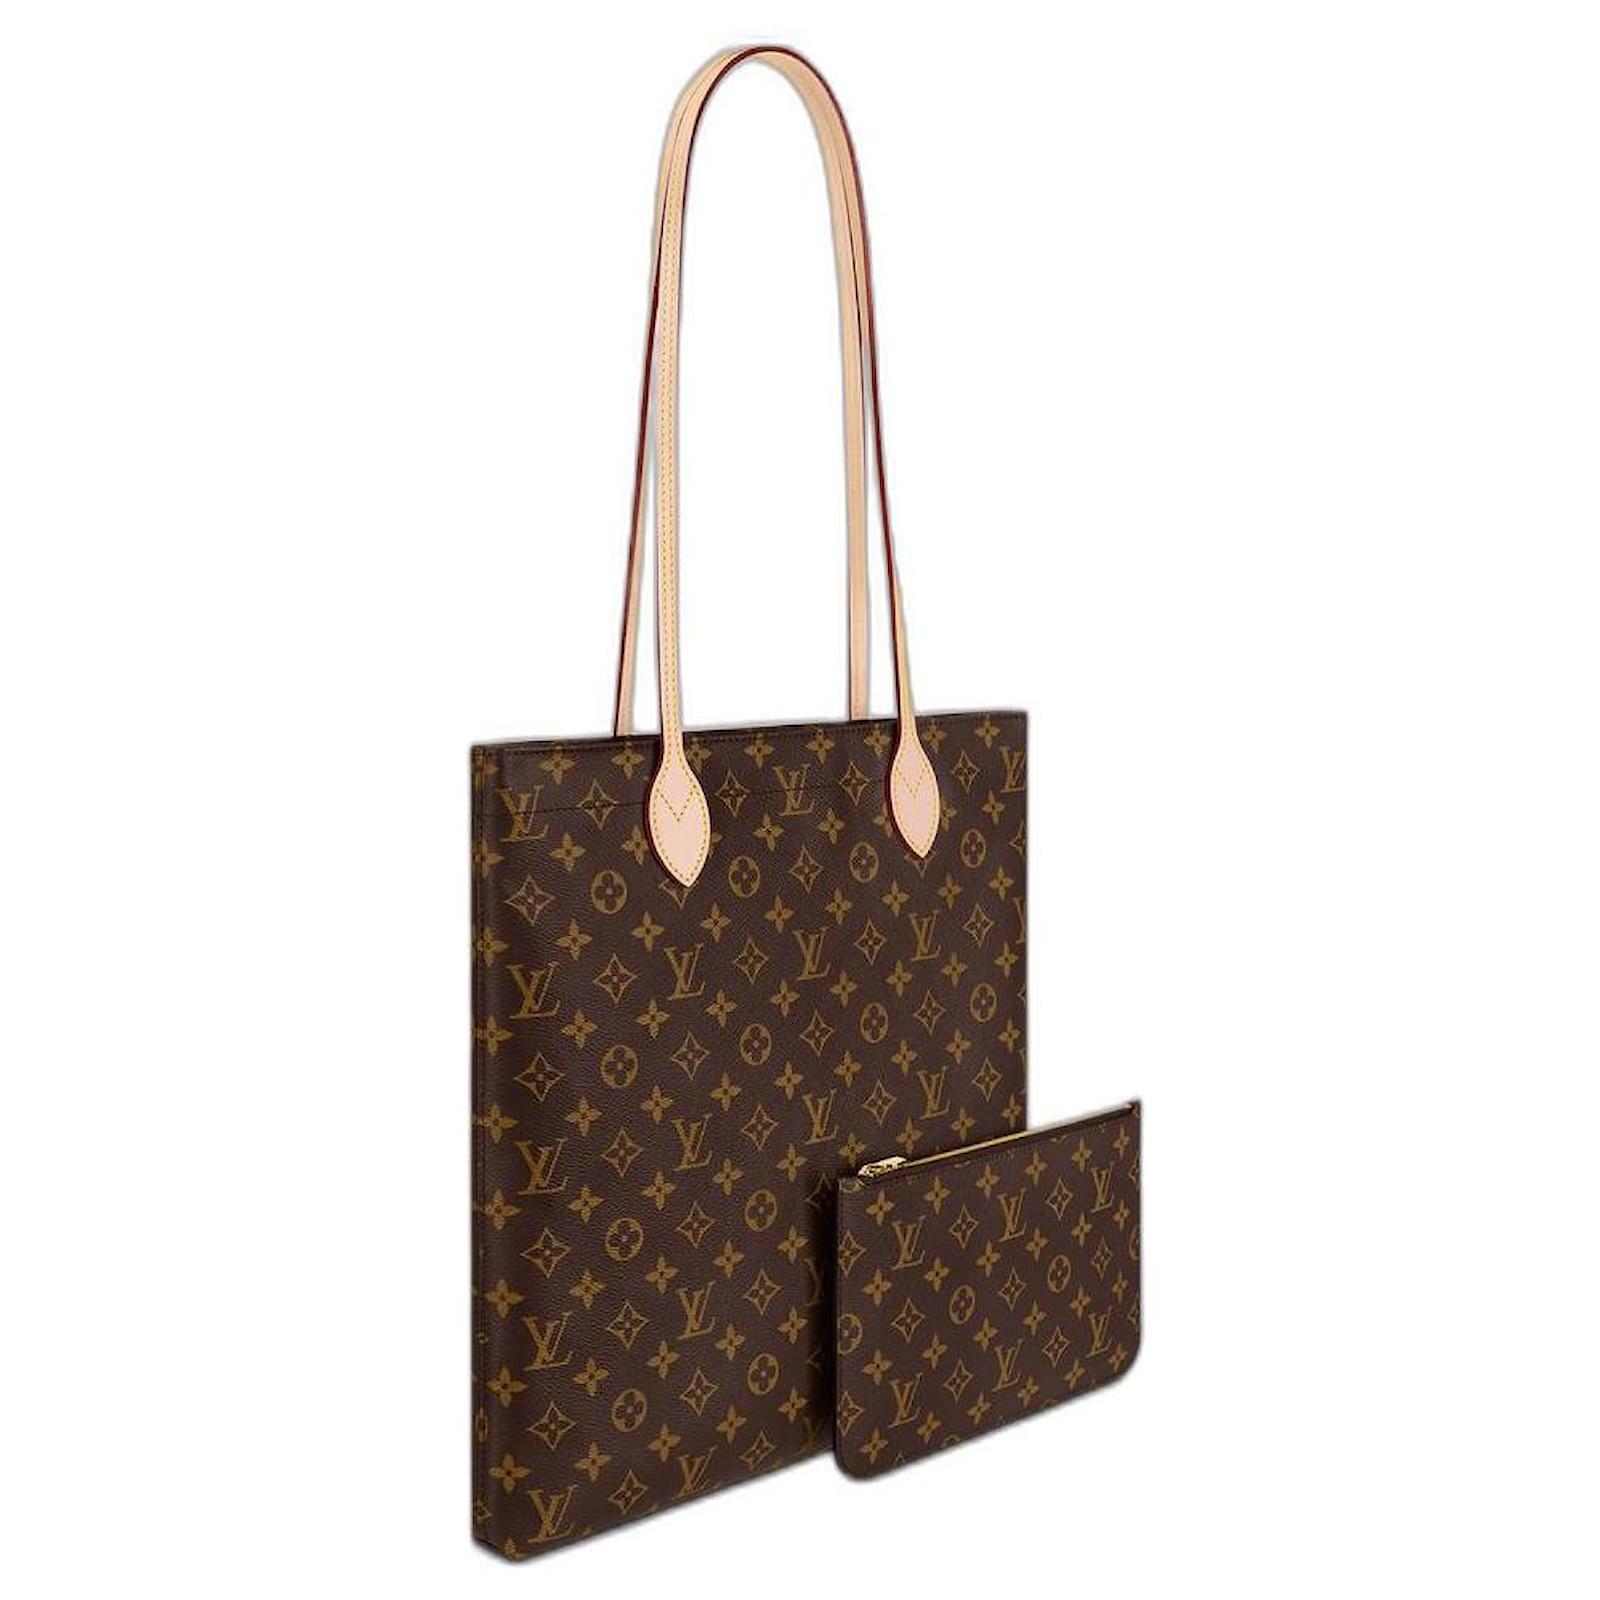 Buy Louis Vuitton Bag Authentic Louis Vuitton Stephen Sprouse Online in  India 